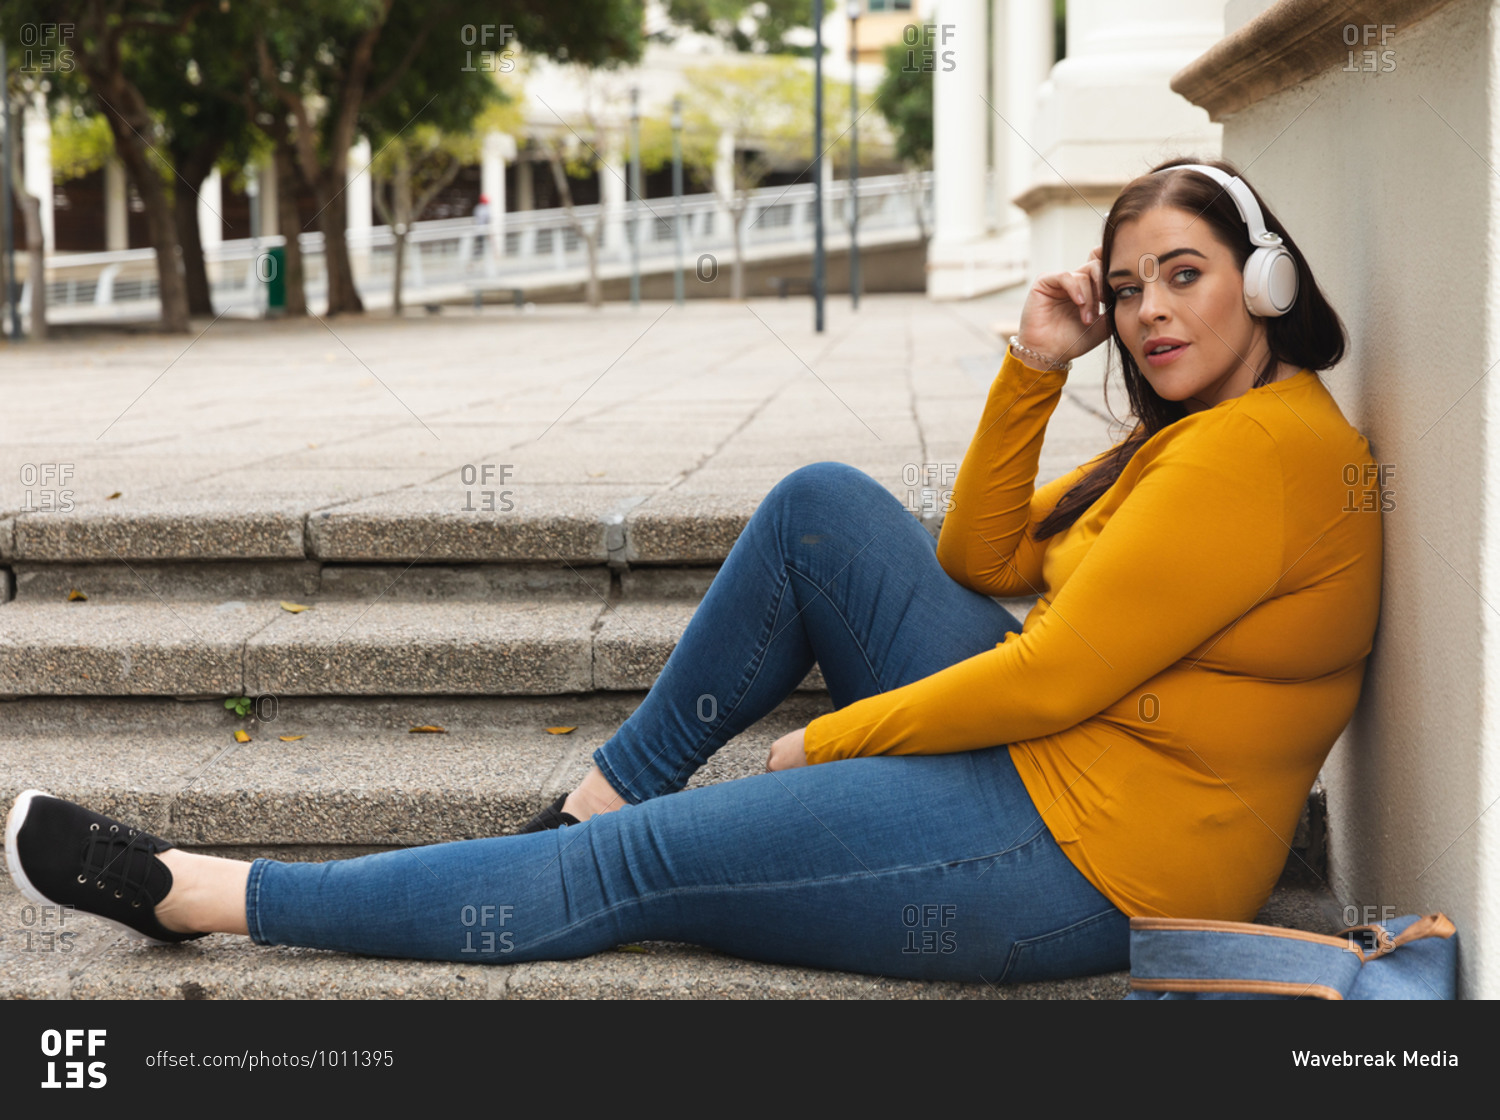 Curvy Caucasian woman out and about in the city streets during the day, sitting on steps, leaning back and listening to music on headphones, with historical building in the background